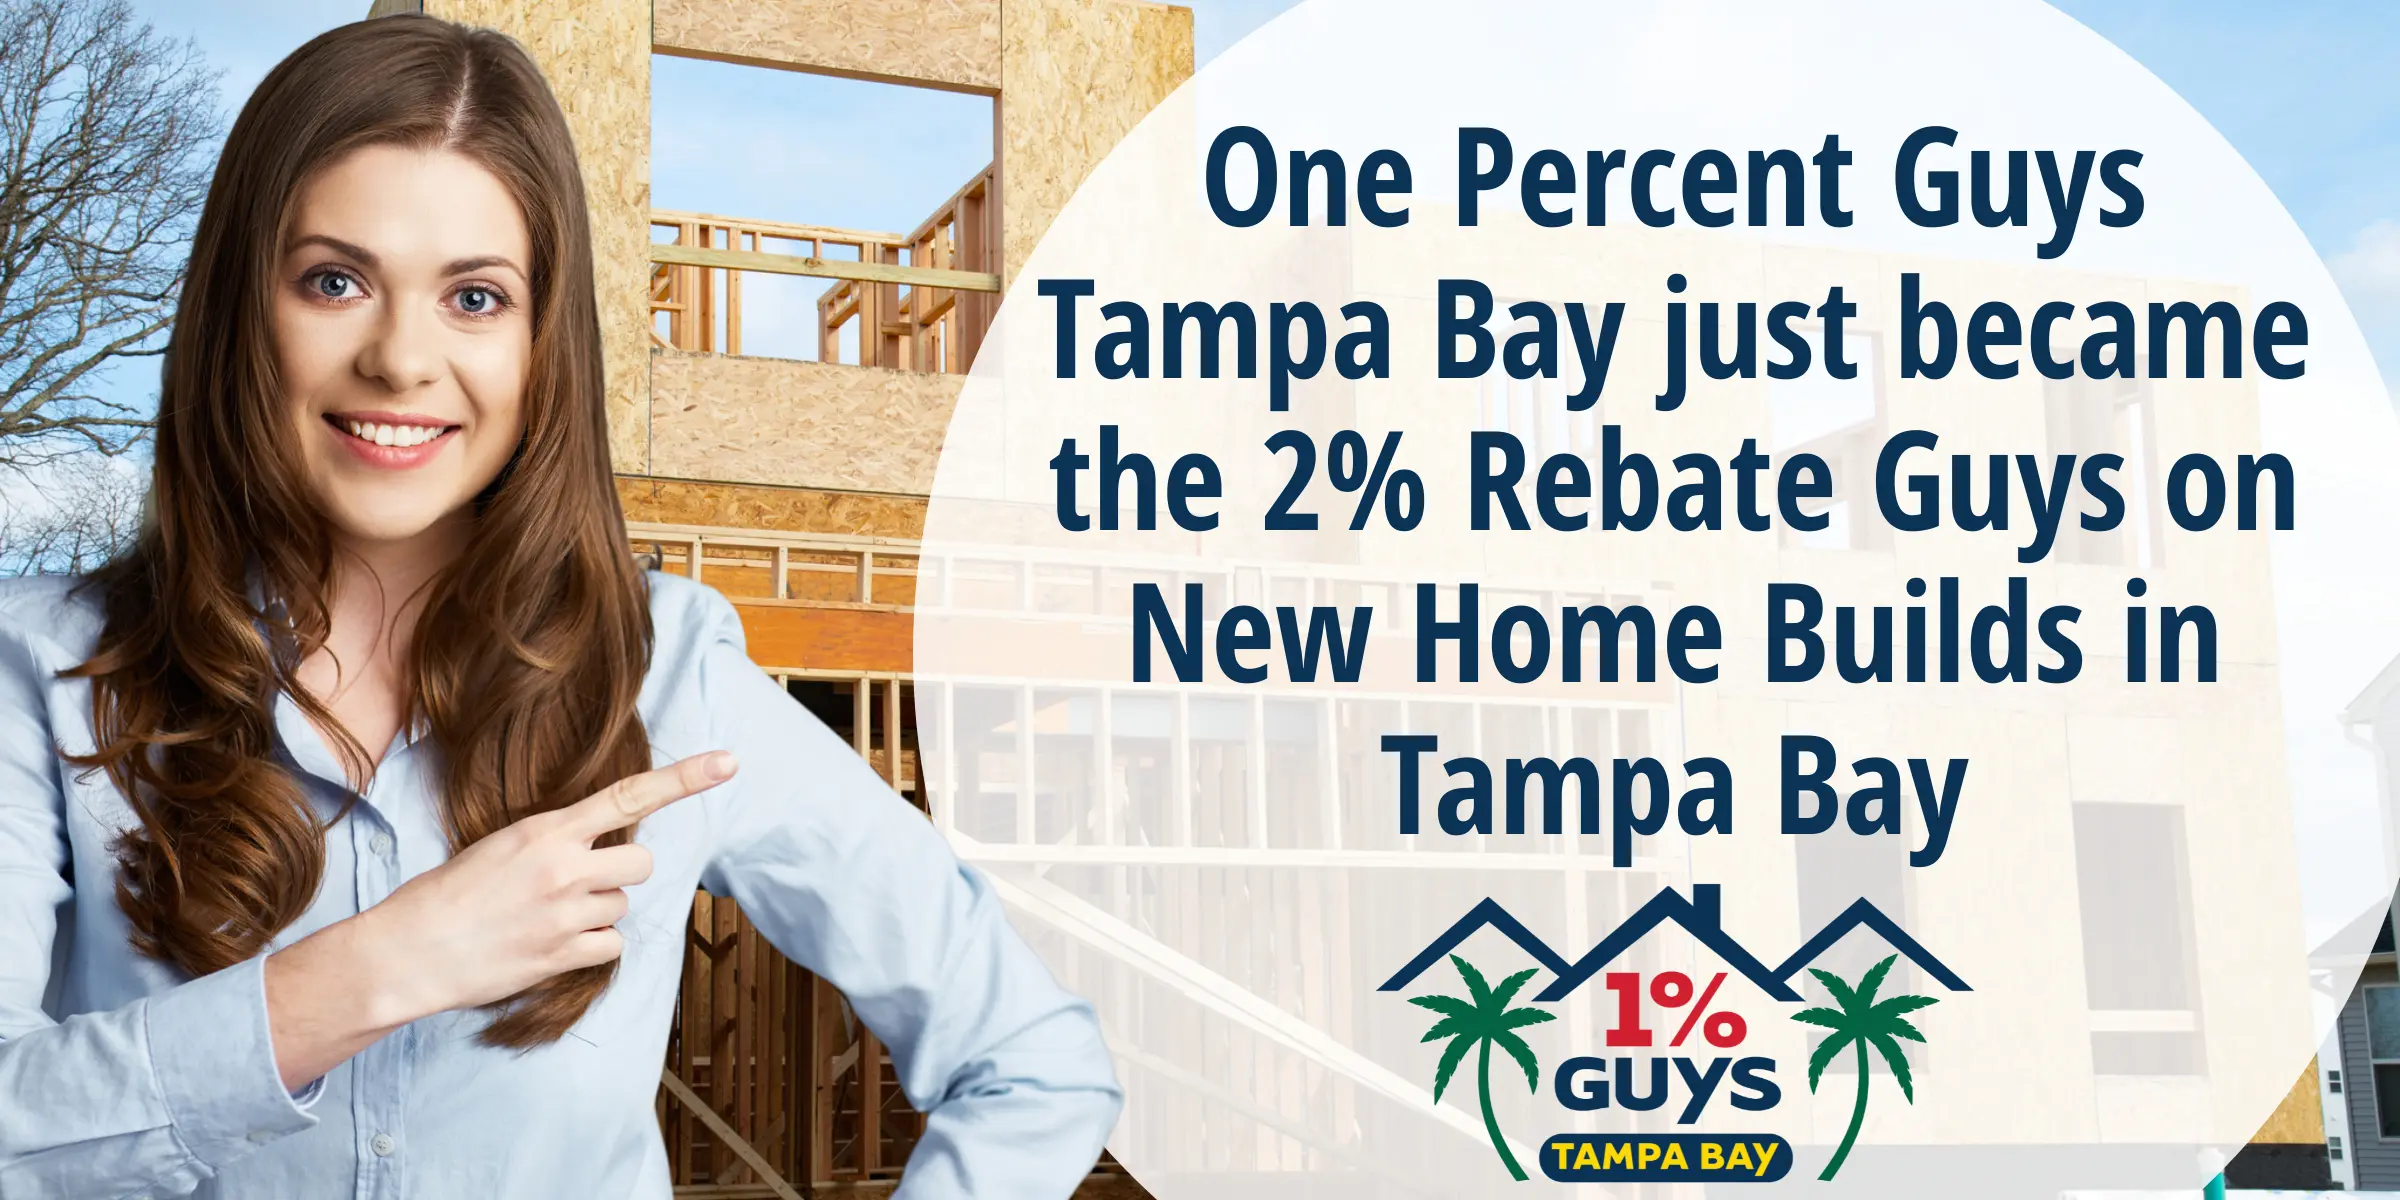 One Percent Guys Tampa Bay just became the 2% Rebate Guys on New Home Builds in Tampa Bay